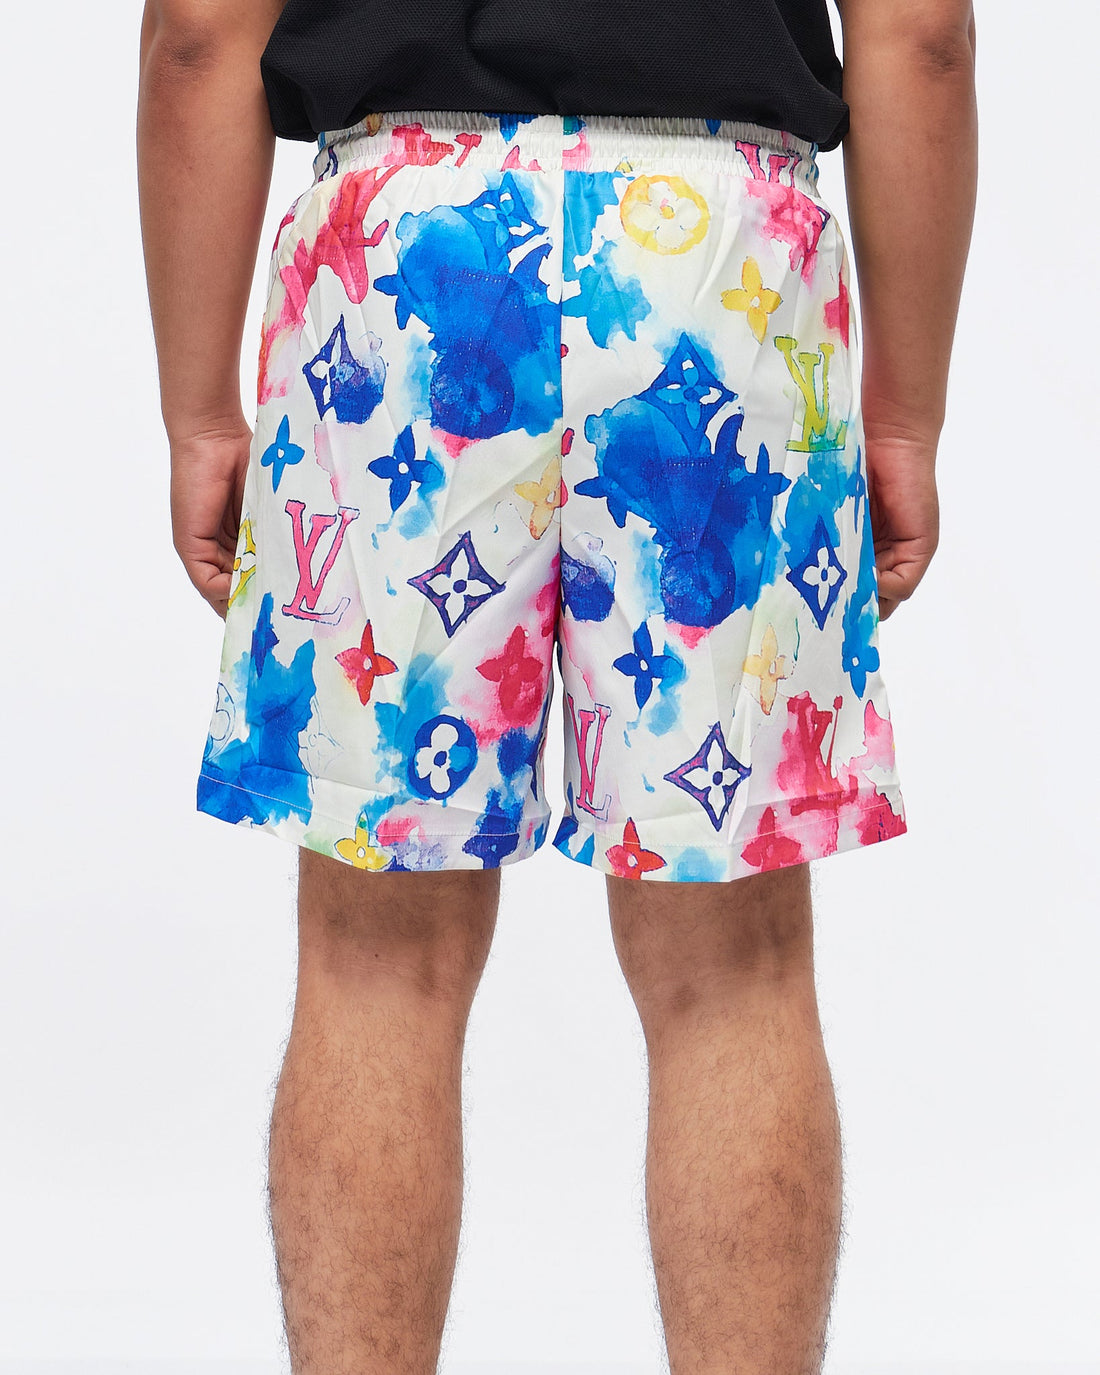 Louis Vuitton Monogram Mens Shorts, Blue, L*Inventory Confirmation Required